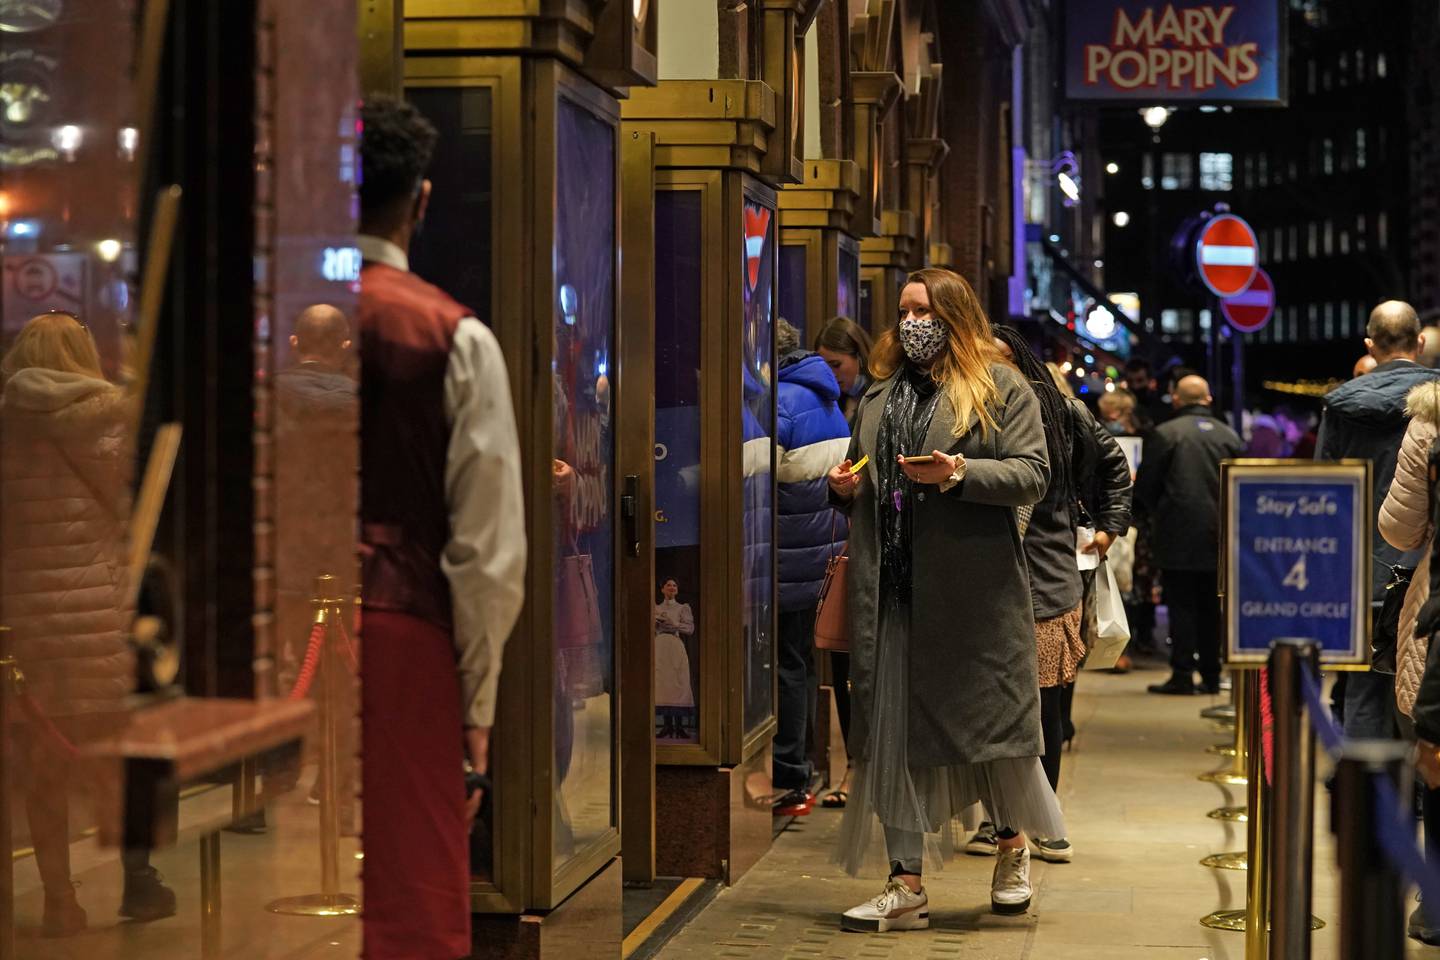 People arriving for the evening performance of 'Mary Poppins' at the Prince Edward Theatre on Old Compton Street, London. PA